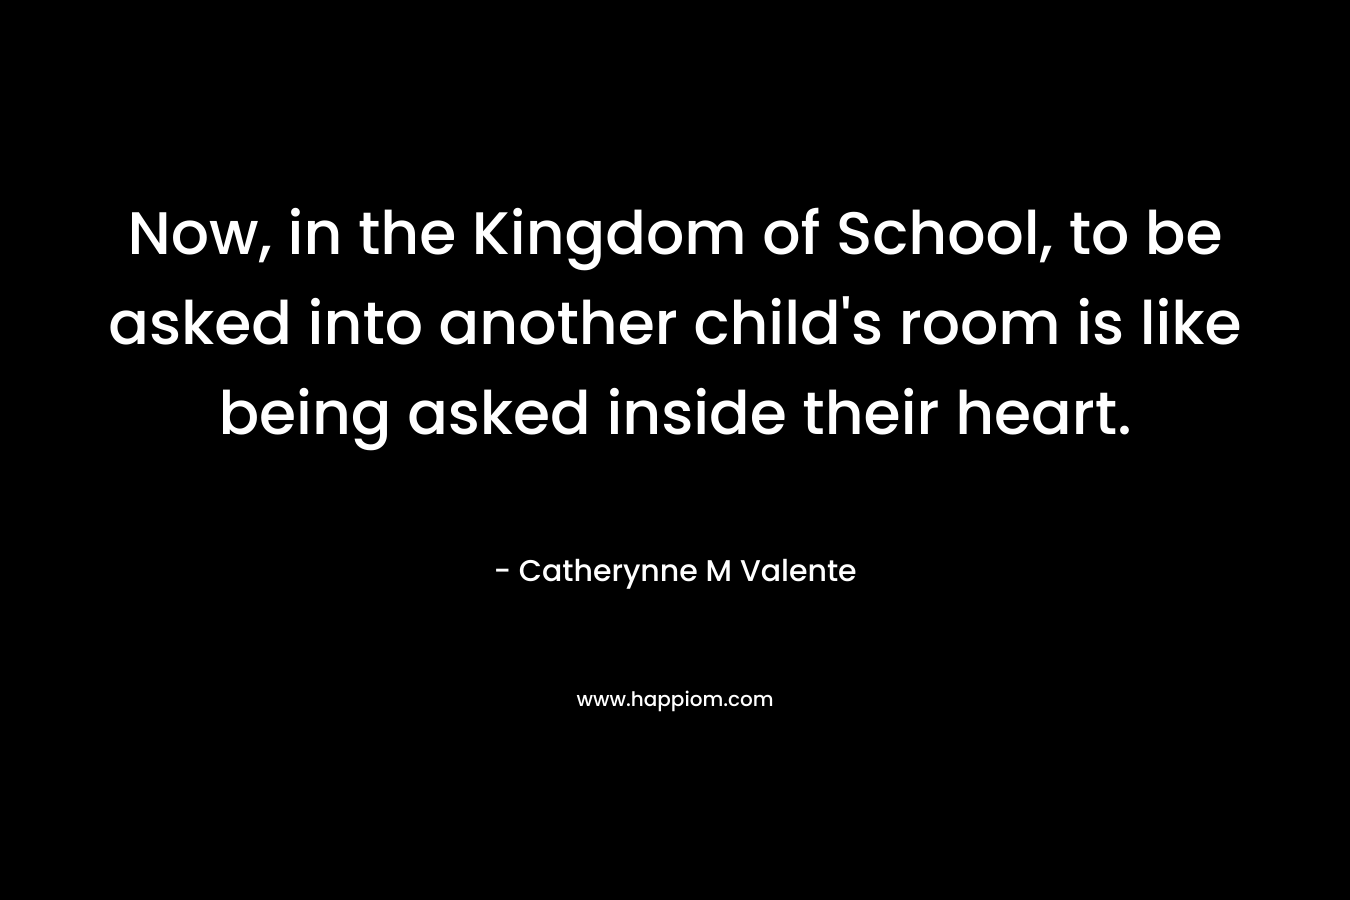 Now, in the Kingdom of School, to be asked into another child’s room is like being asked inside their heart. – Catherynne M Valente